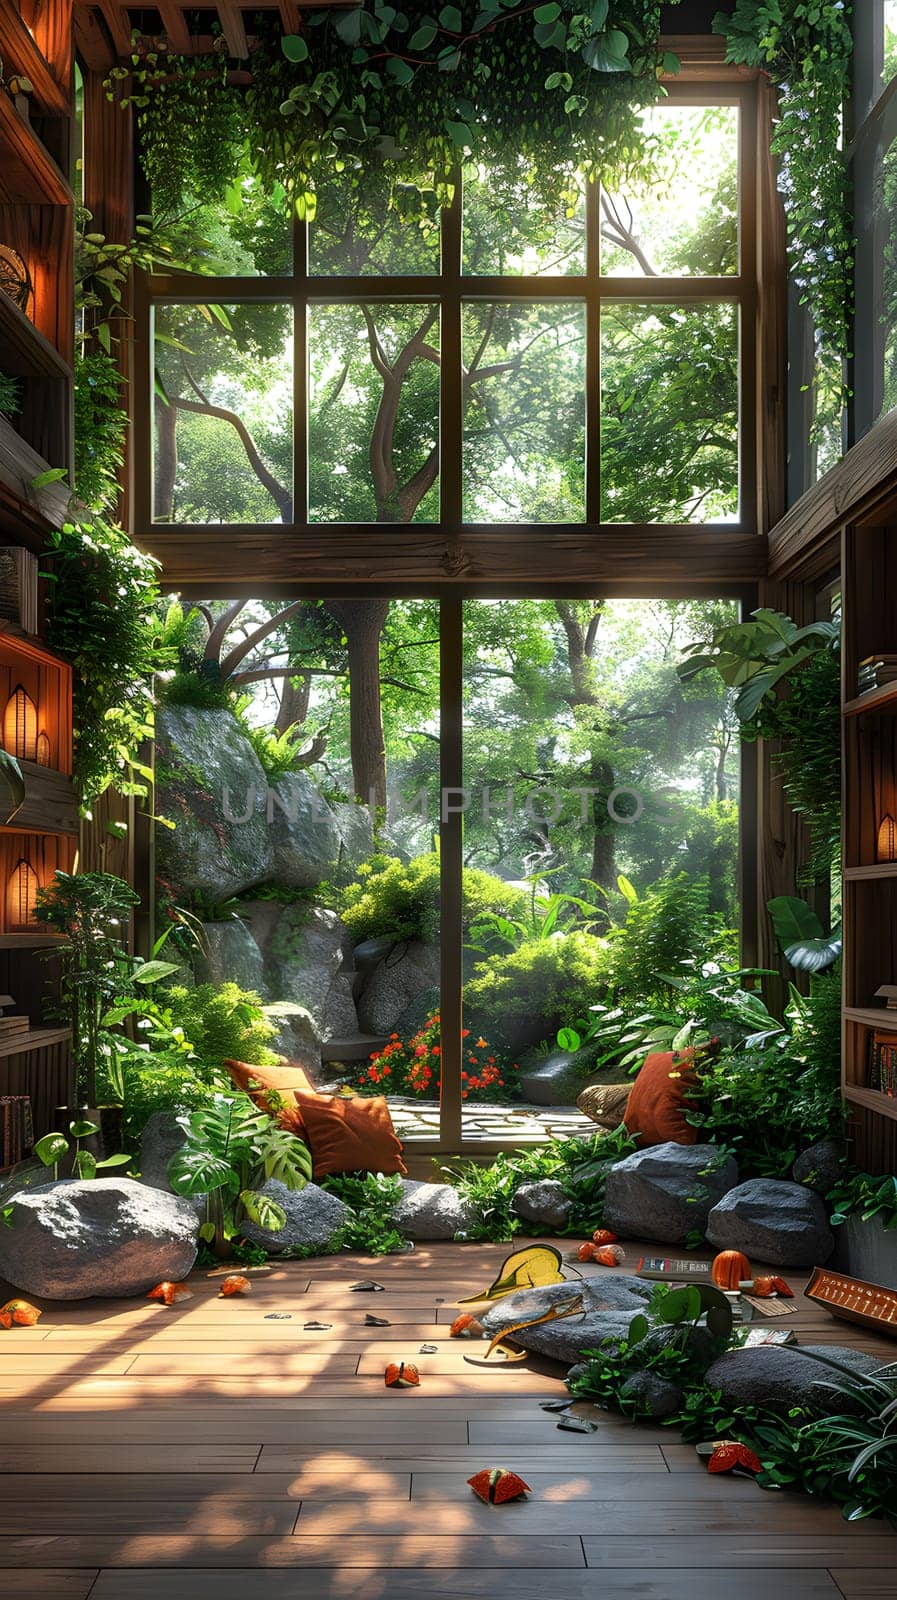 A room in a building with a large window overlooking lush vegetation and surrounded by plants and trees, allowing sunlight to filter through the interior design